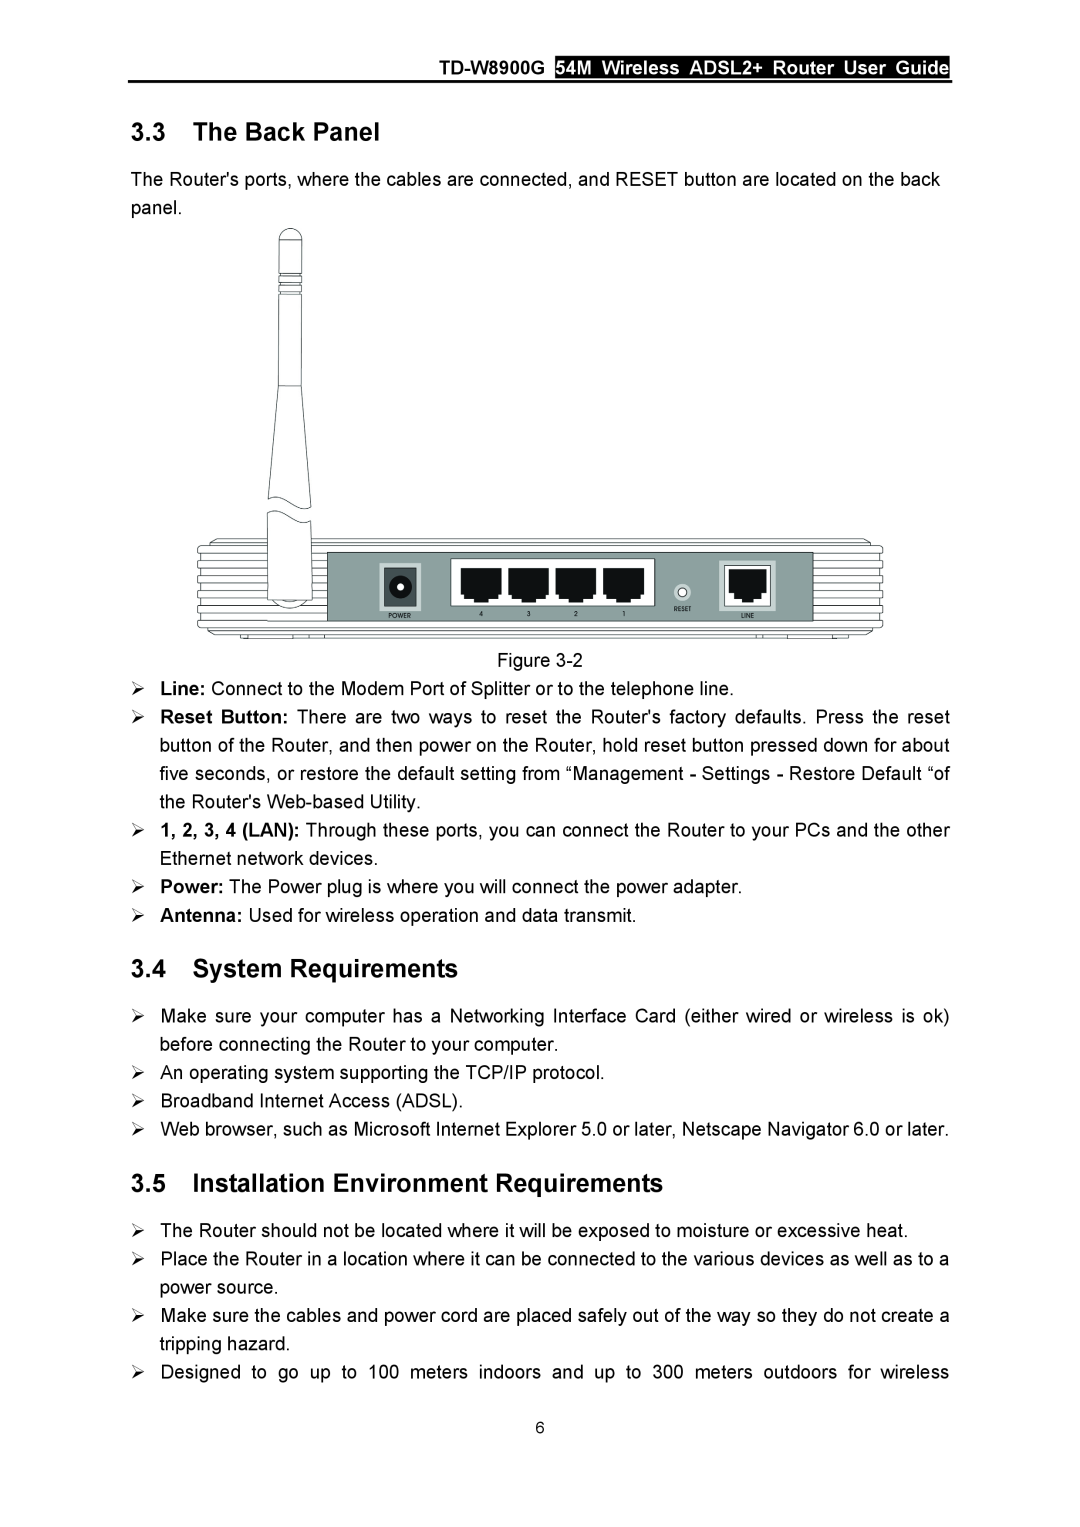 TP-Link TD-W8900G manual The Back Panel, System Requirements, Installation Environment Requirements 